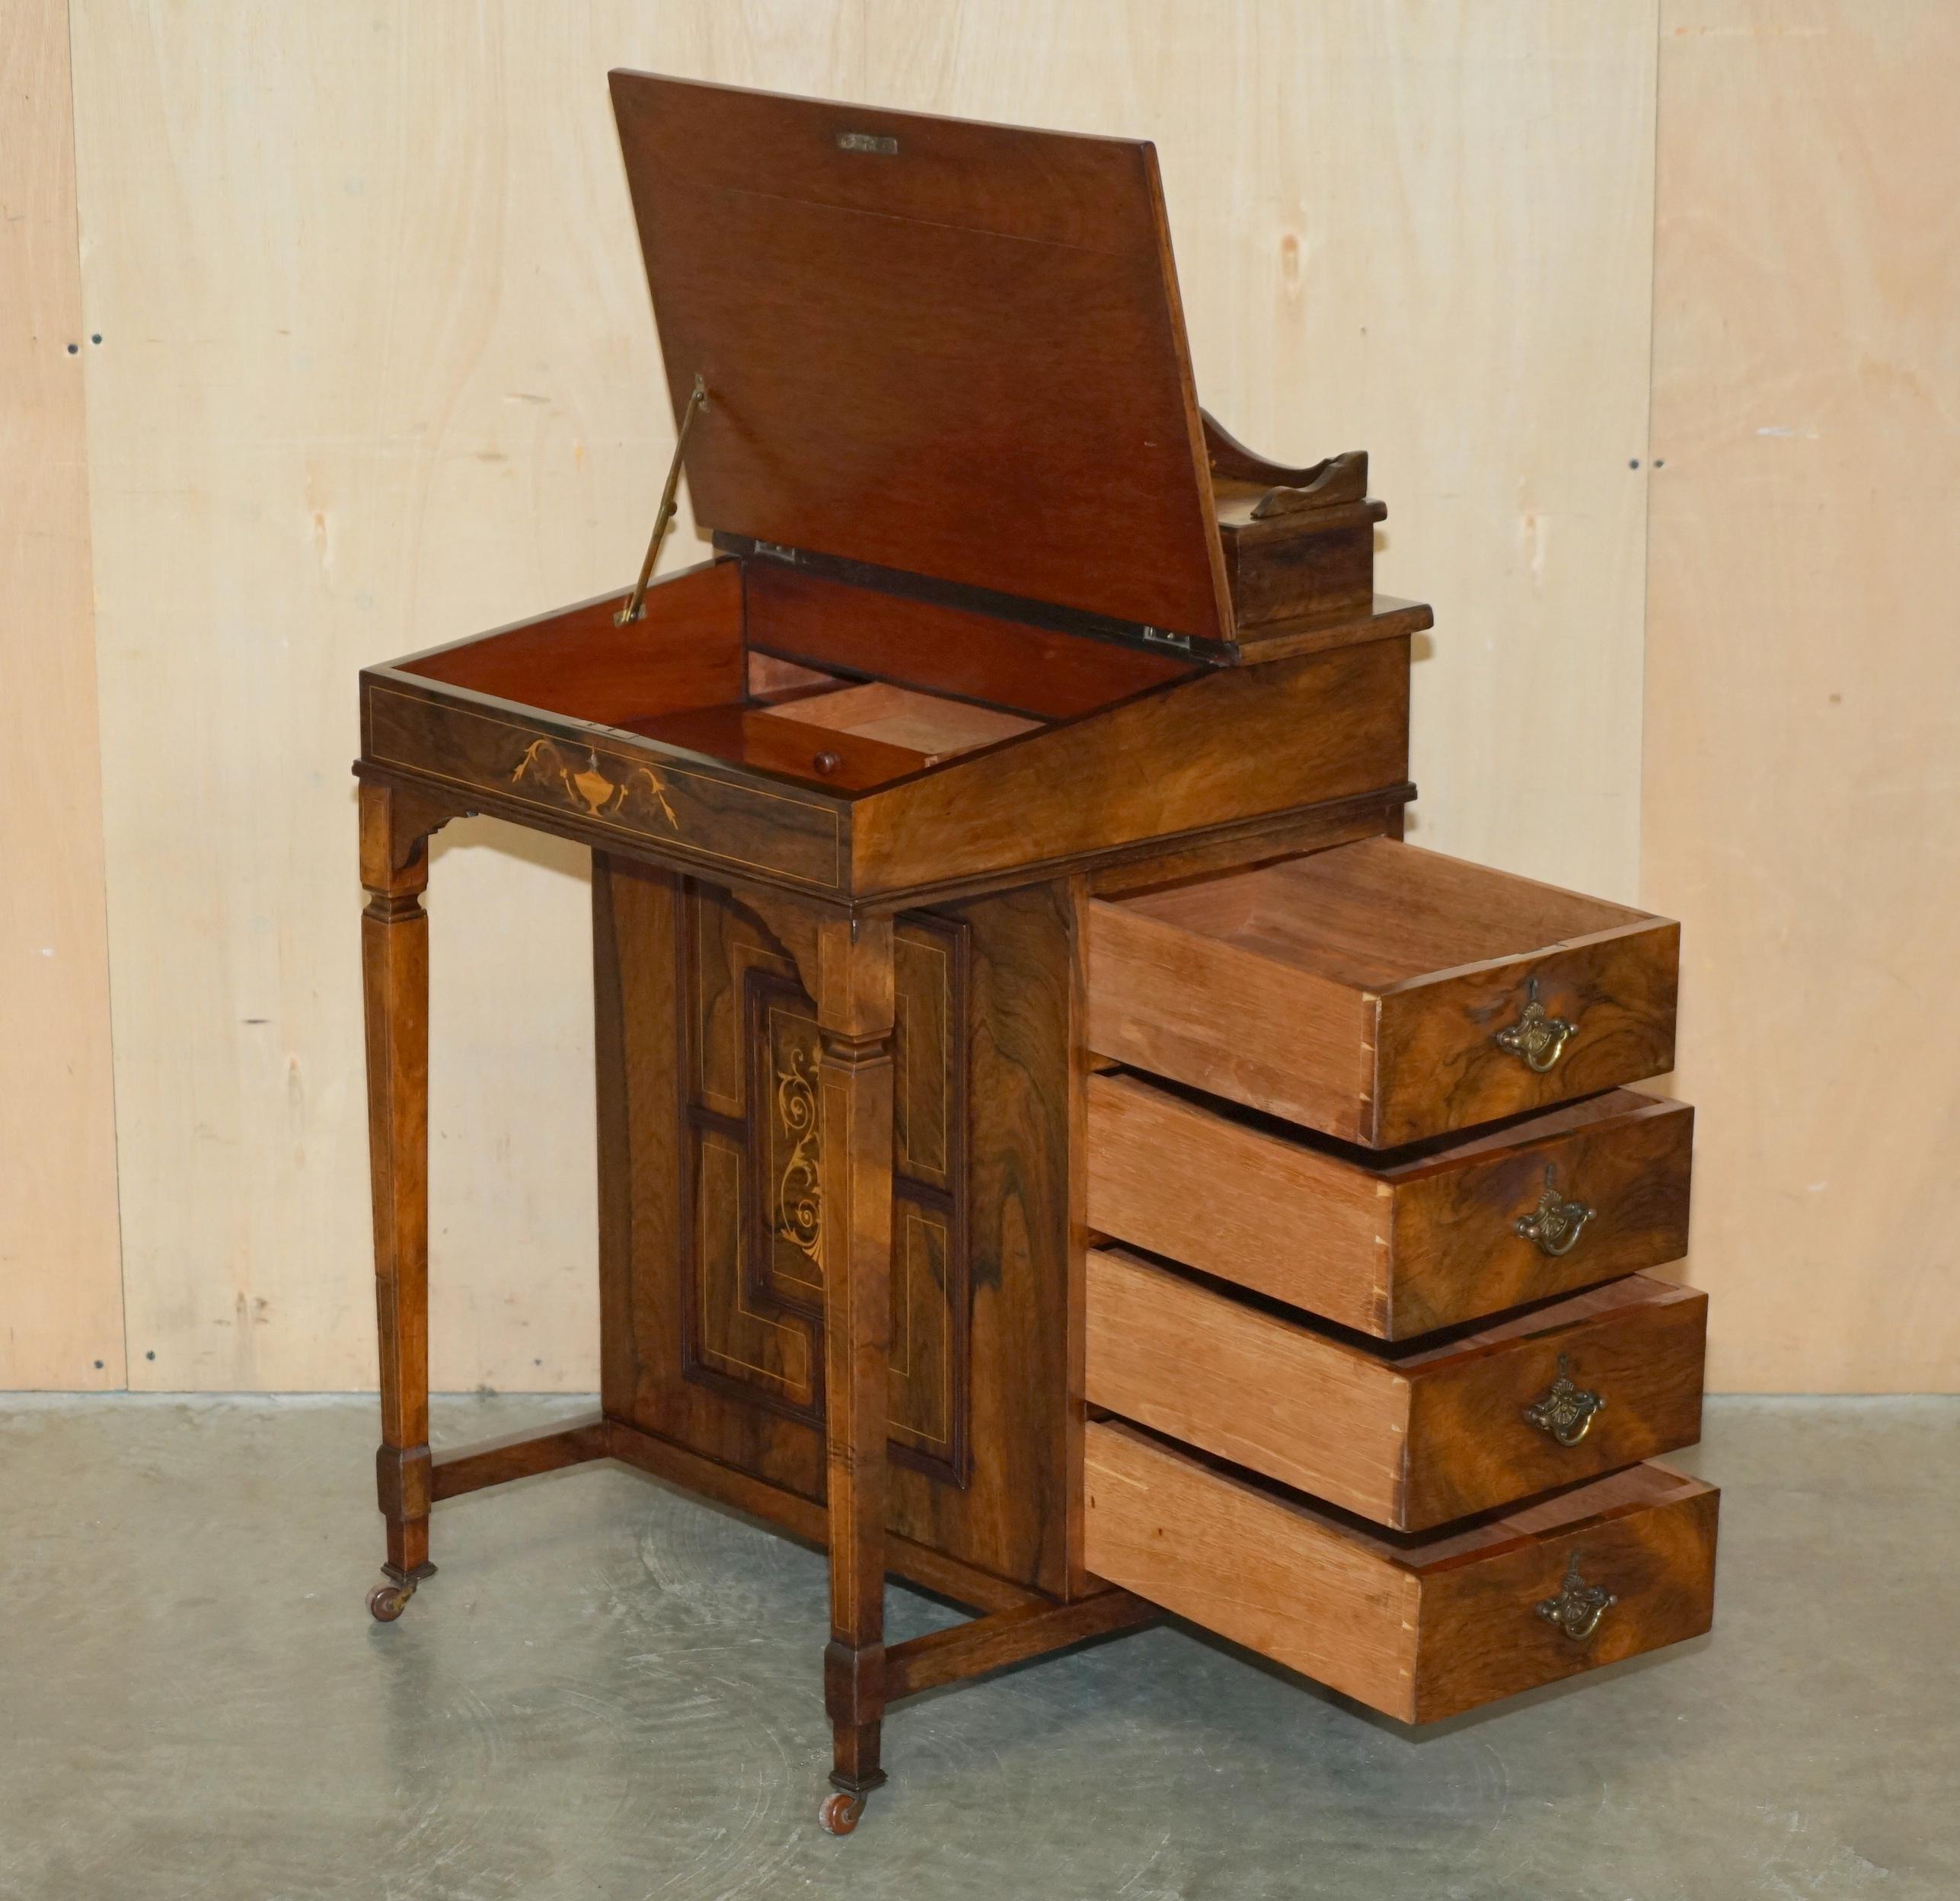 RESTORED ViCTORIAN HARDWOOD MARQUETRY INLAID & BROWN LEATHER DAVENPORT DESK For Sale 7